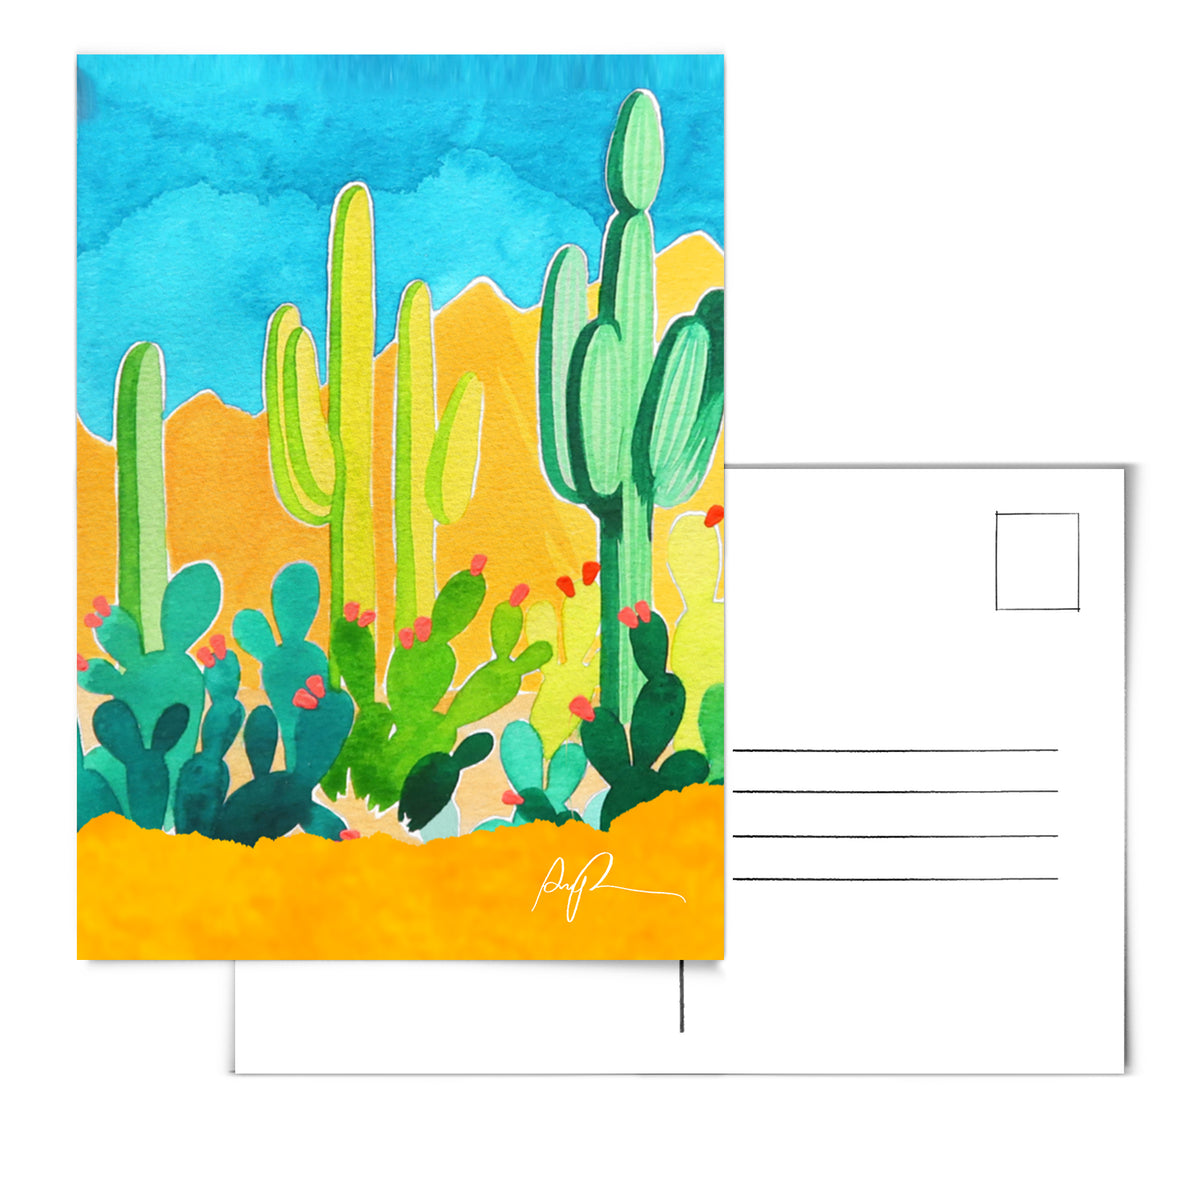 Canson Blank Watercolor Postcards - 140 lb, Pkg of 15